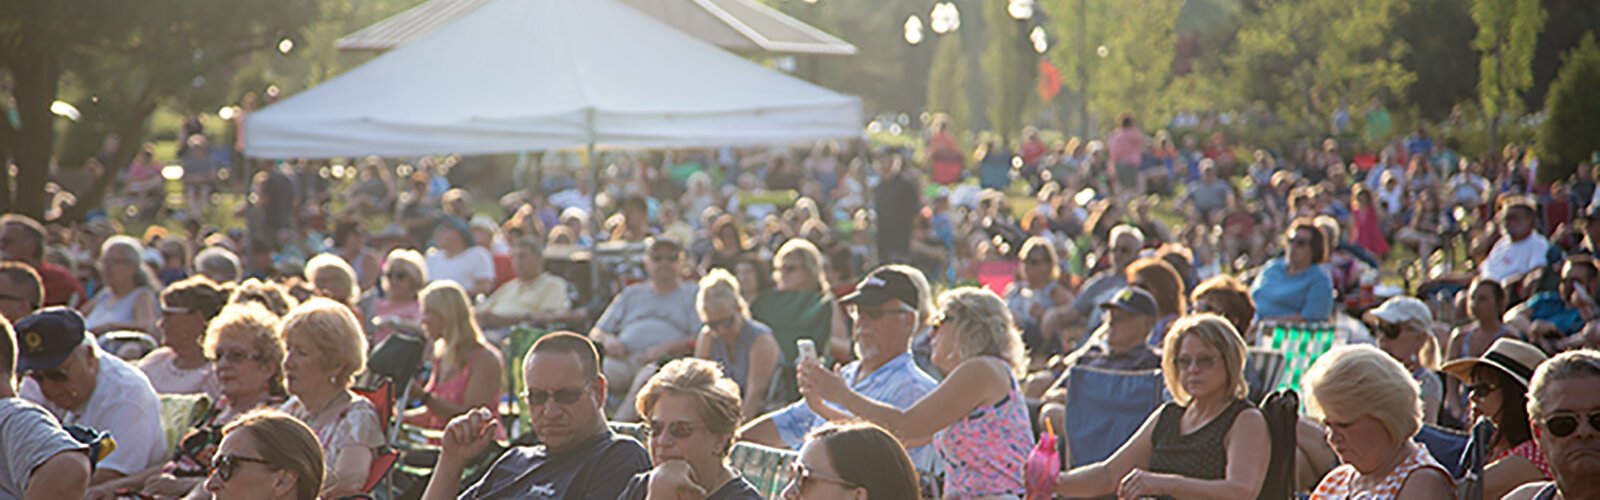 Before COVID-19, Sterling Heights' summer events like Music in the Park proved popular.